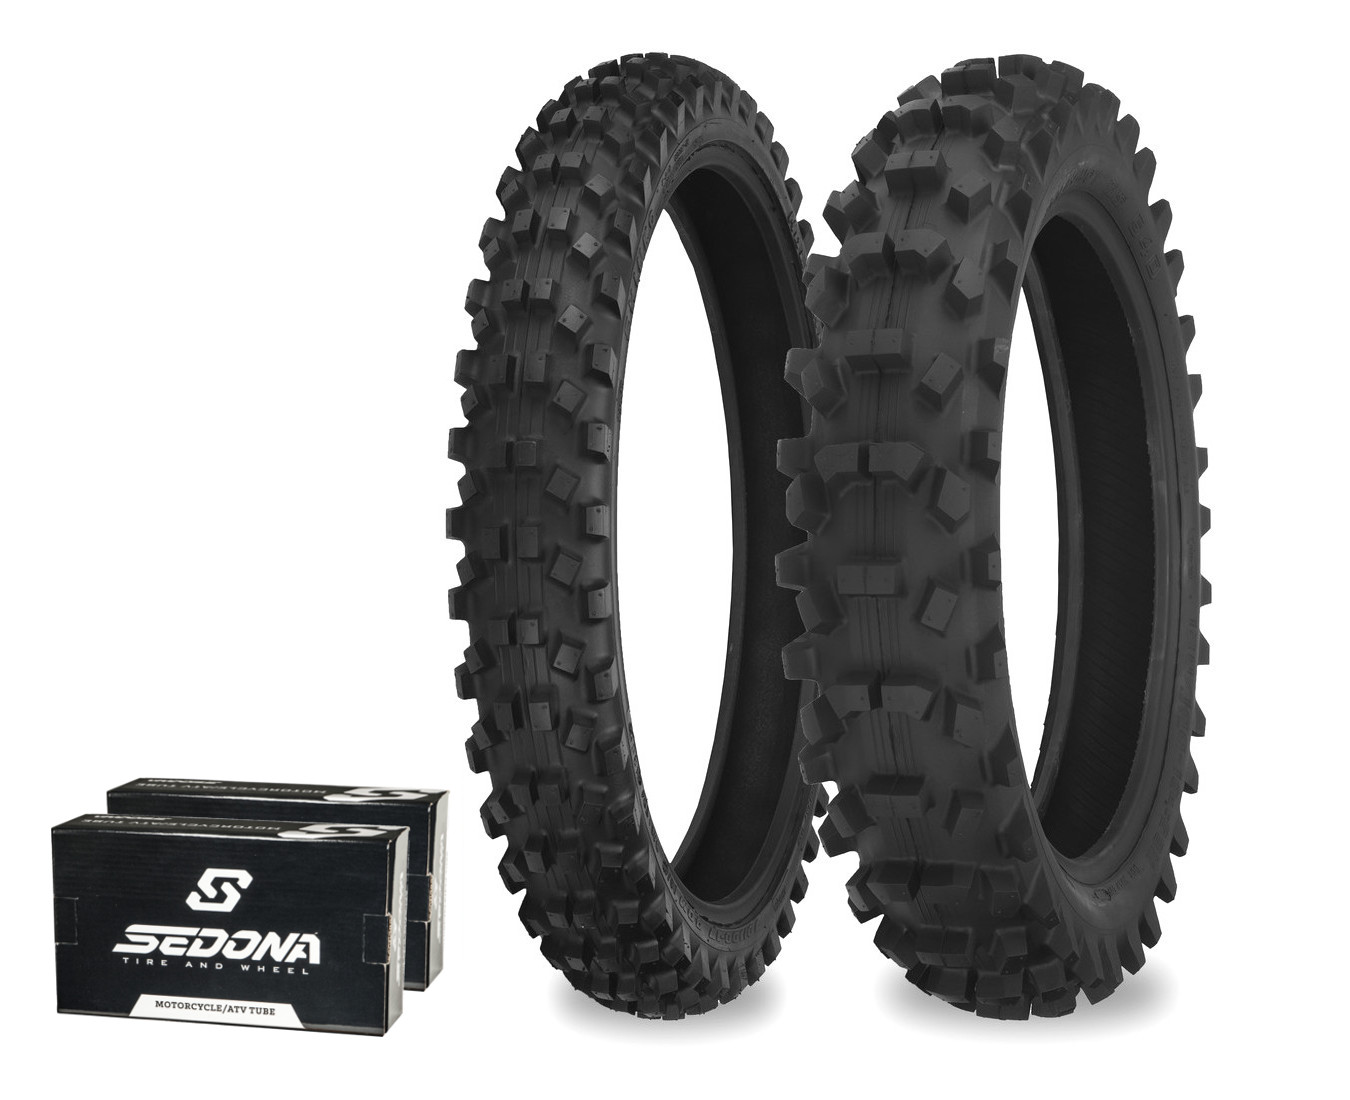 540 Series 100/90-19 80/100-21 - Dirt Tire Kit w/ Tubes - Click Image to Close